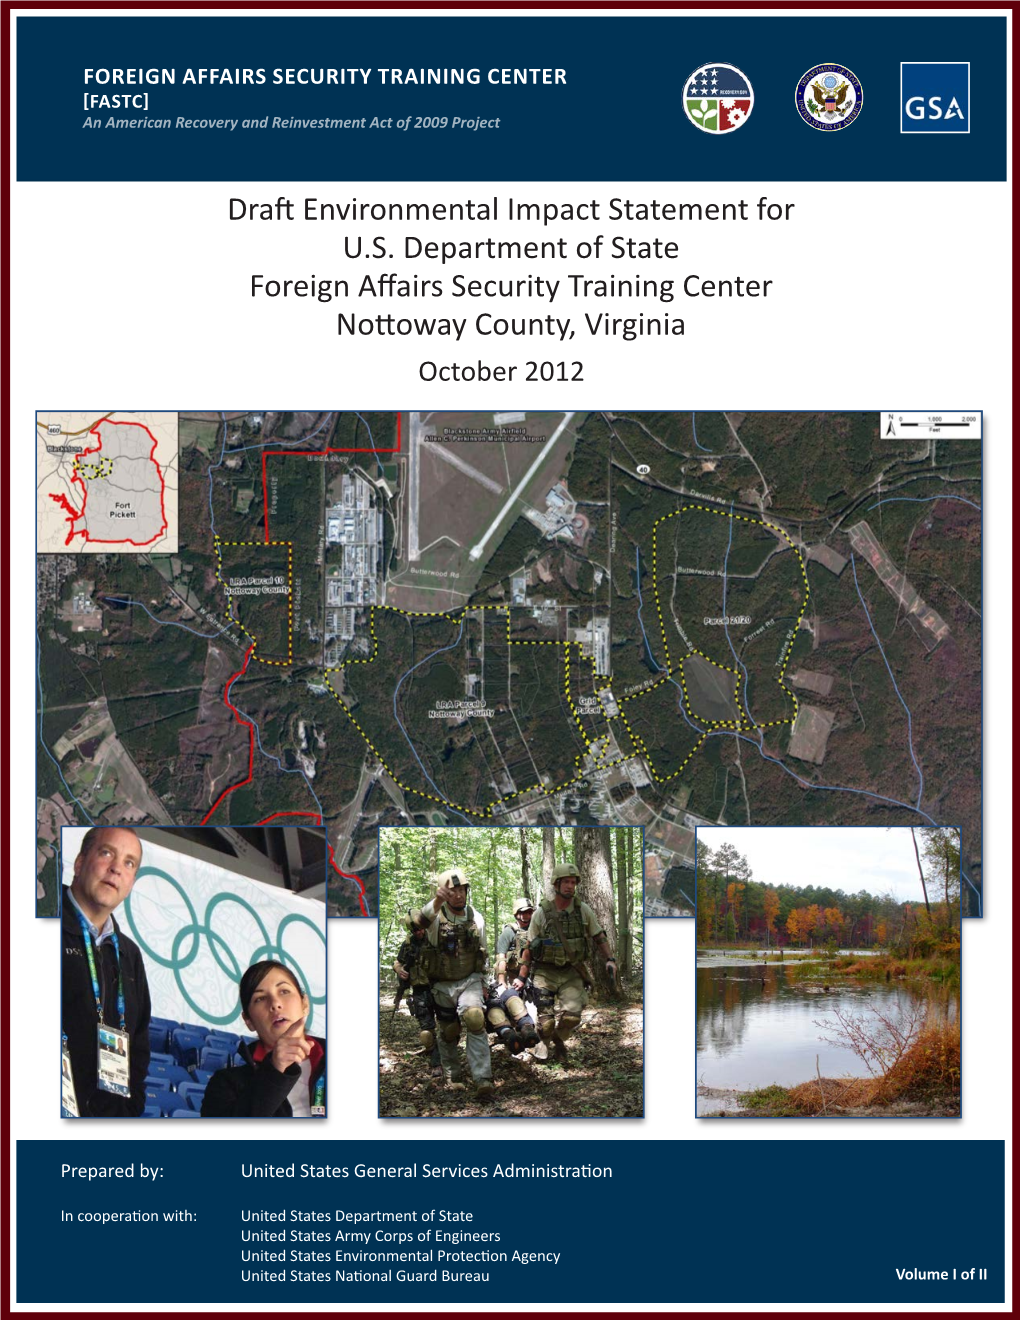 Draft Environmental Impact Statement for FASTC Nottoway County, Virginia